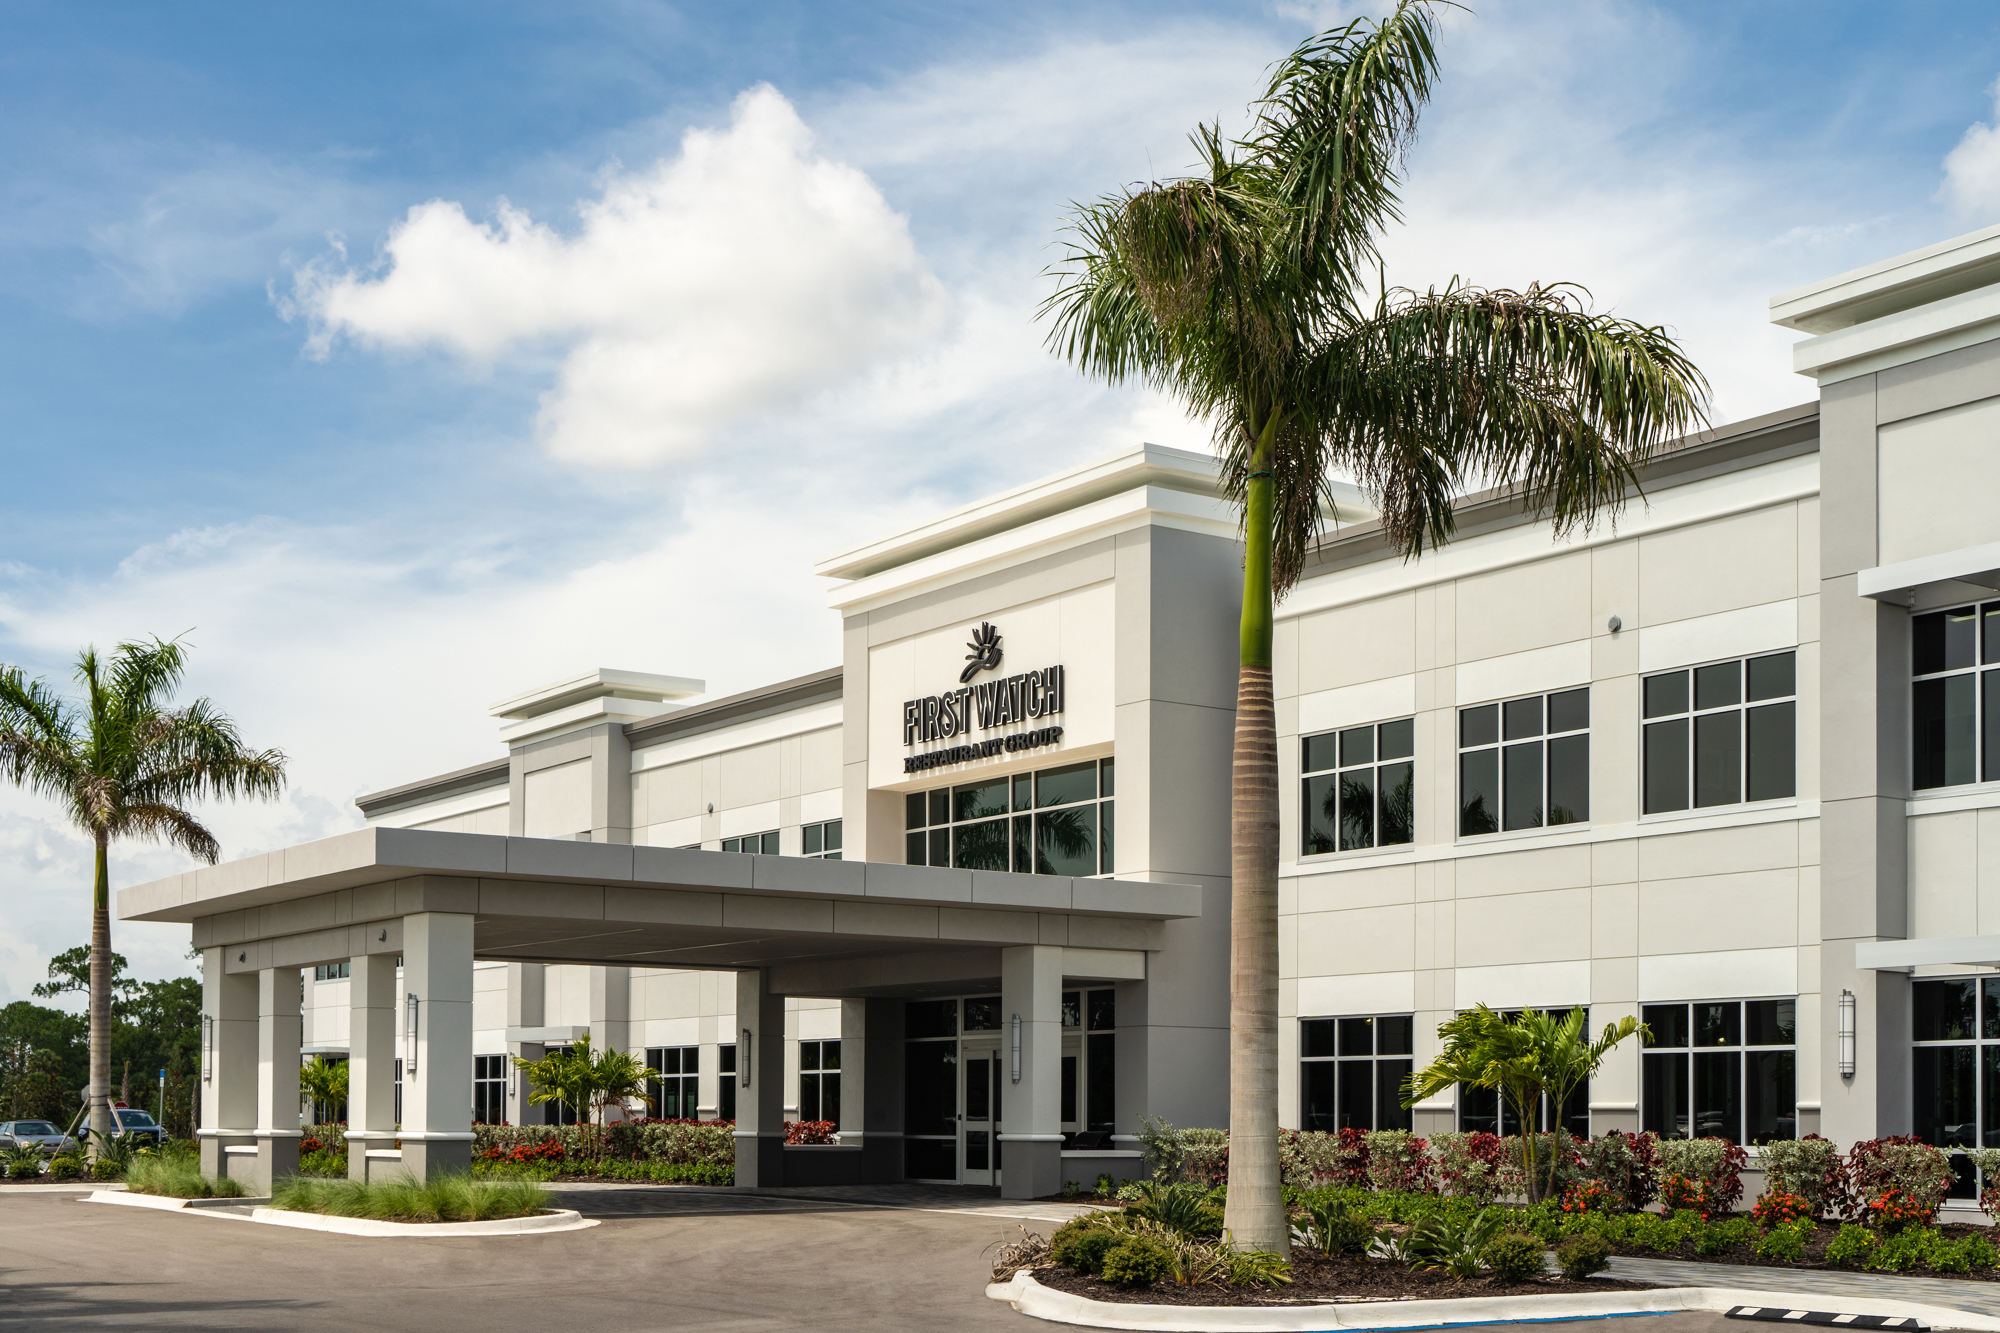 Courtesy. First Watch opened its new headquarters in east Manatee County this summer.